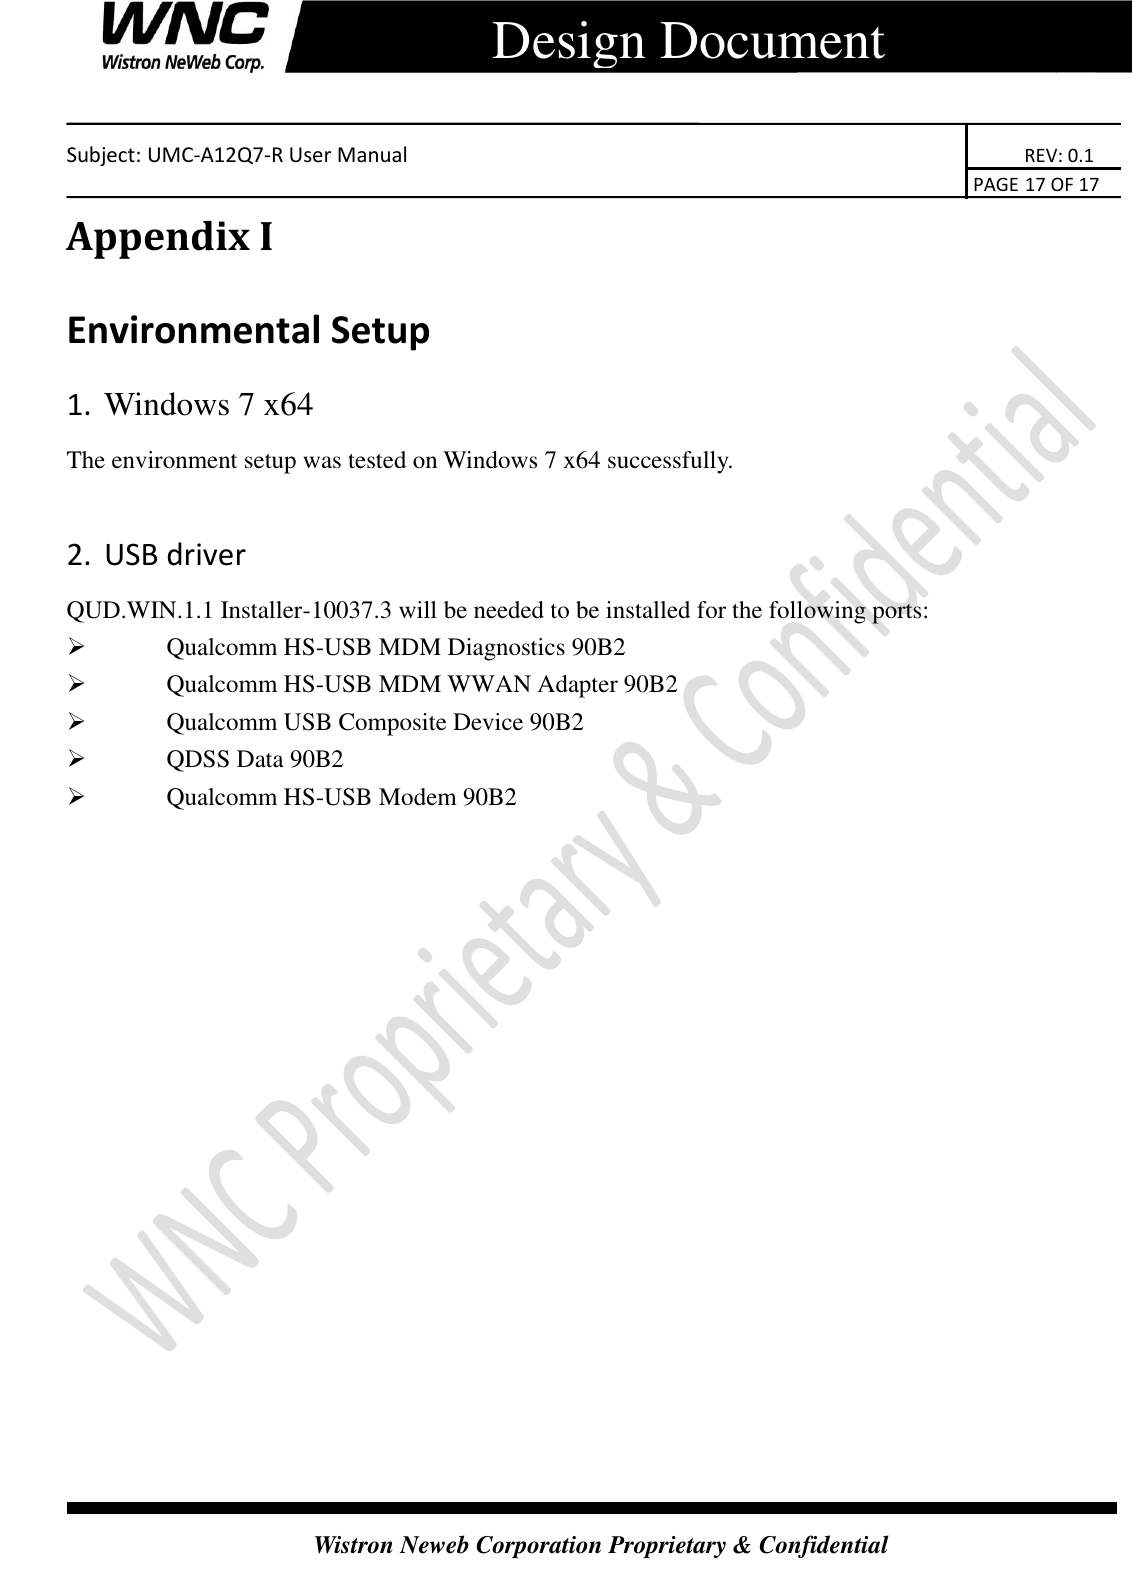    Subject: UMC-A12Q7-R User Manual                                                                      REV: 0.1                                                                                        PAGE 17 OF 17  Wistron Neweb Corporation Proprietary &amp; Confidential      Design Document Appendix I Environmental Setup 1. Windows 7 x64 The environment setup was tested on Windows 7 x64 successfully.  2. USB driver QUD.WIN.1.1 Installer-10037.3 will be needed to be installed for the following ports:    Qualcomm HS-USB MDM Diagnostics 90B2    Qualcomm HS-USB MDM WWAN Adapter 90B2    Qualcomm USB Composite Device 90B2    QDSS Data 90B2    Qualcomm HS-USB Modem 90B2  